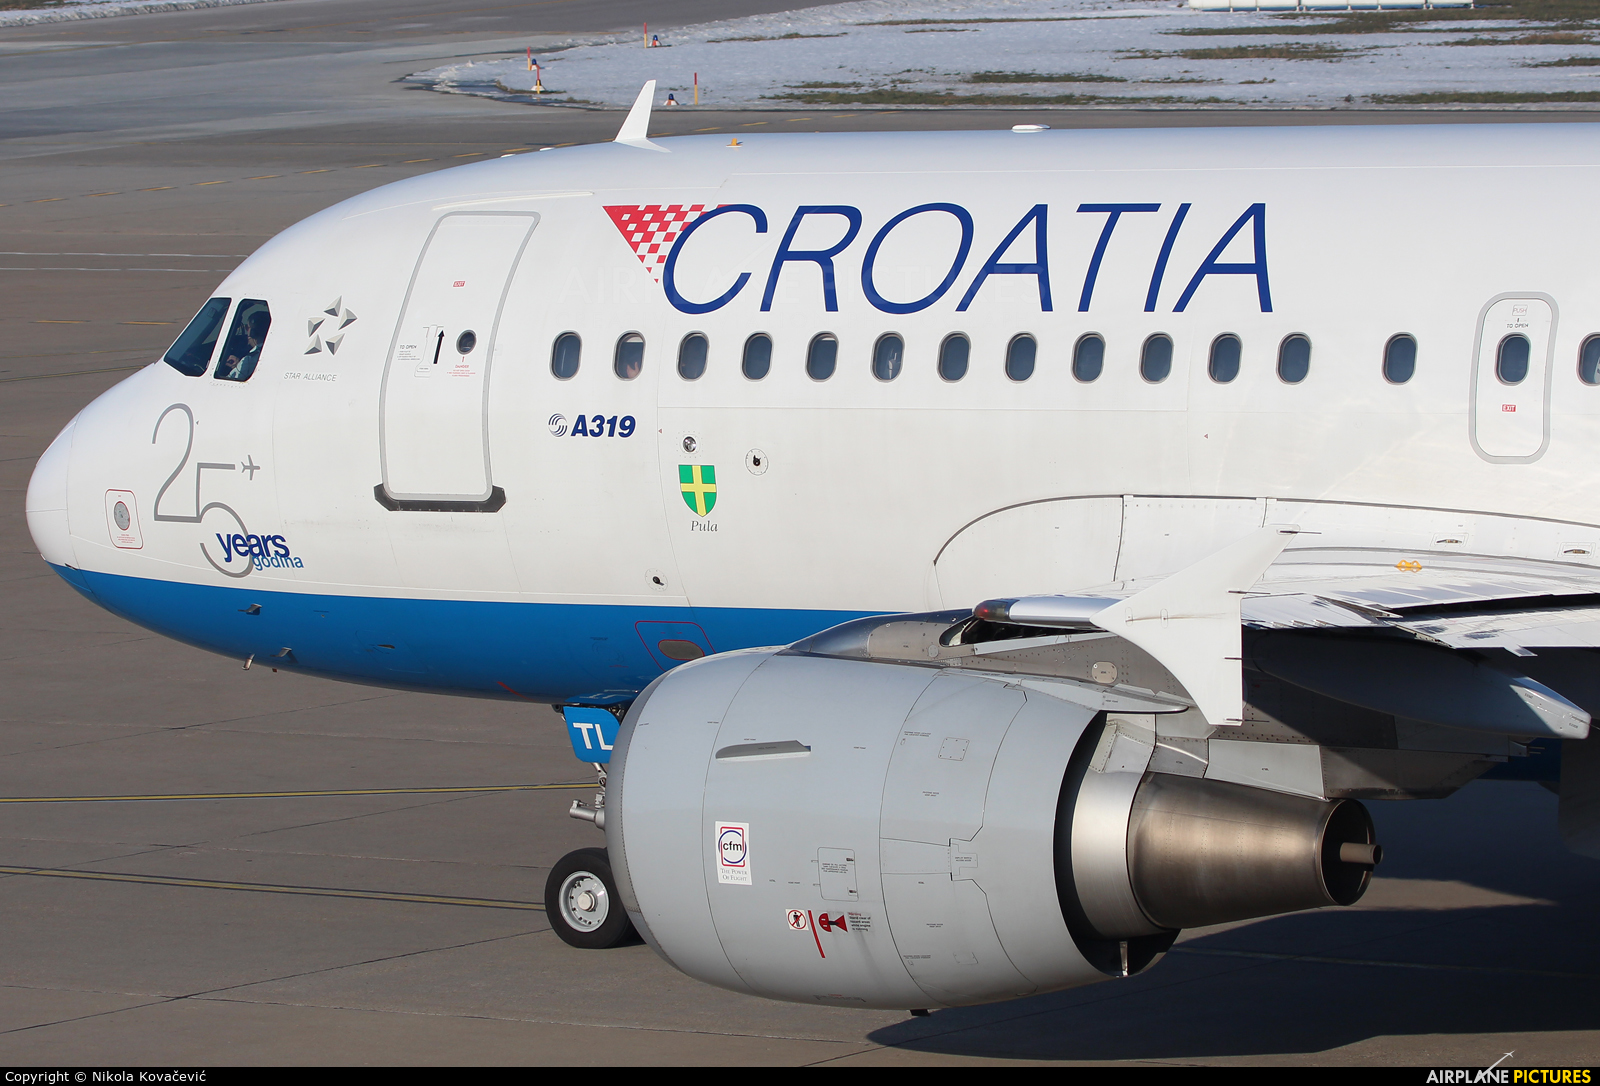 Croatia Airlines 9A-CTL aircraft at Zagreb